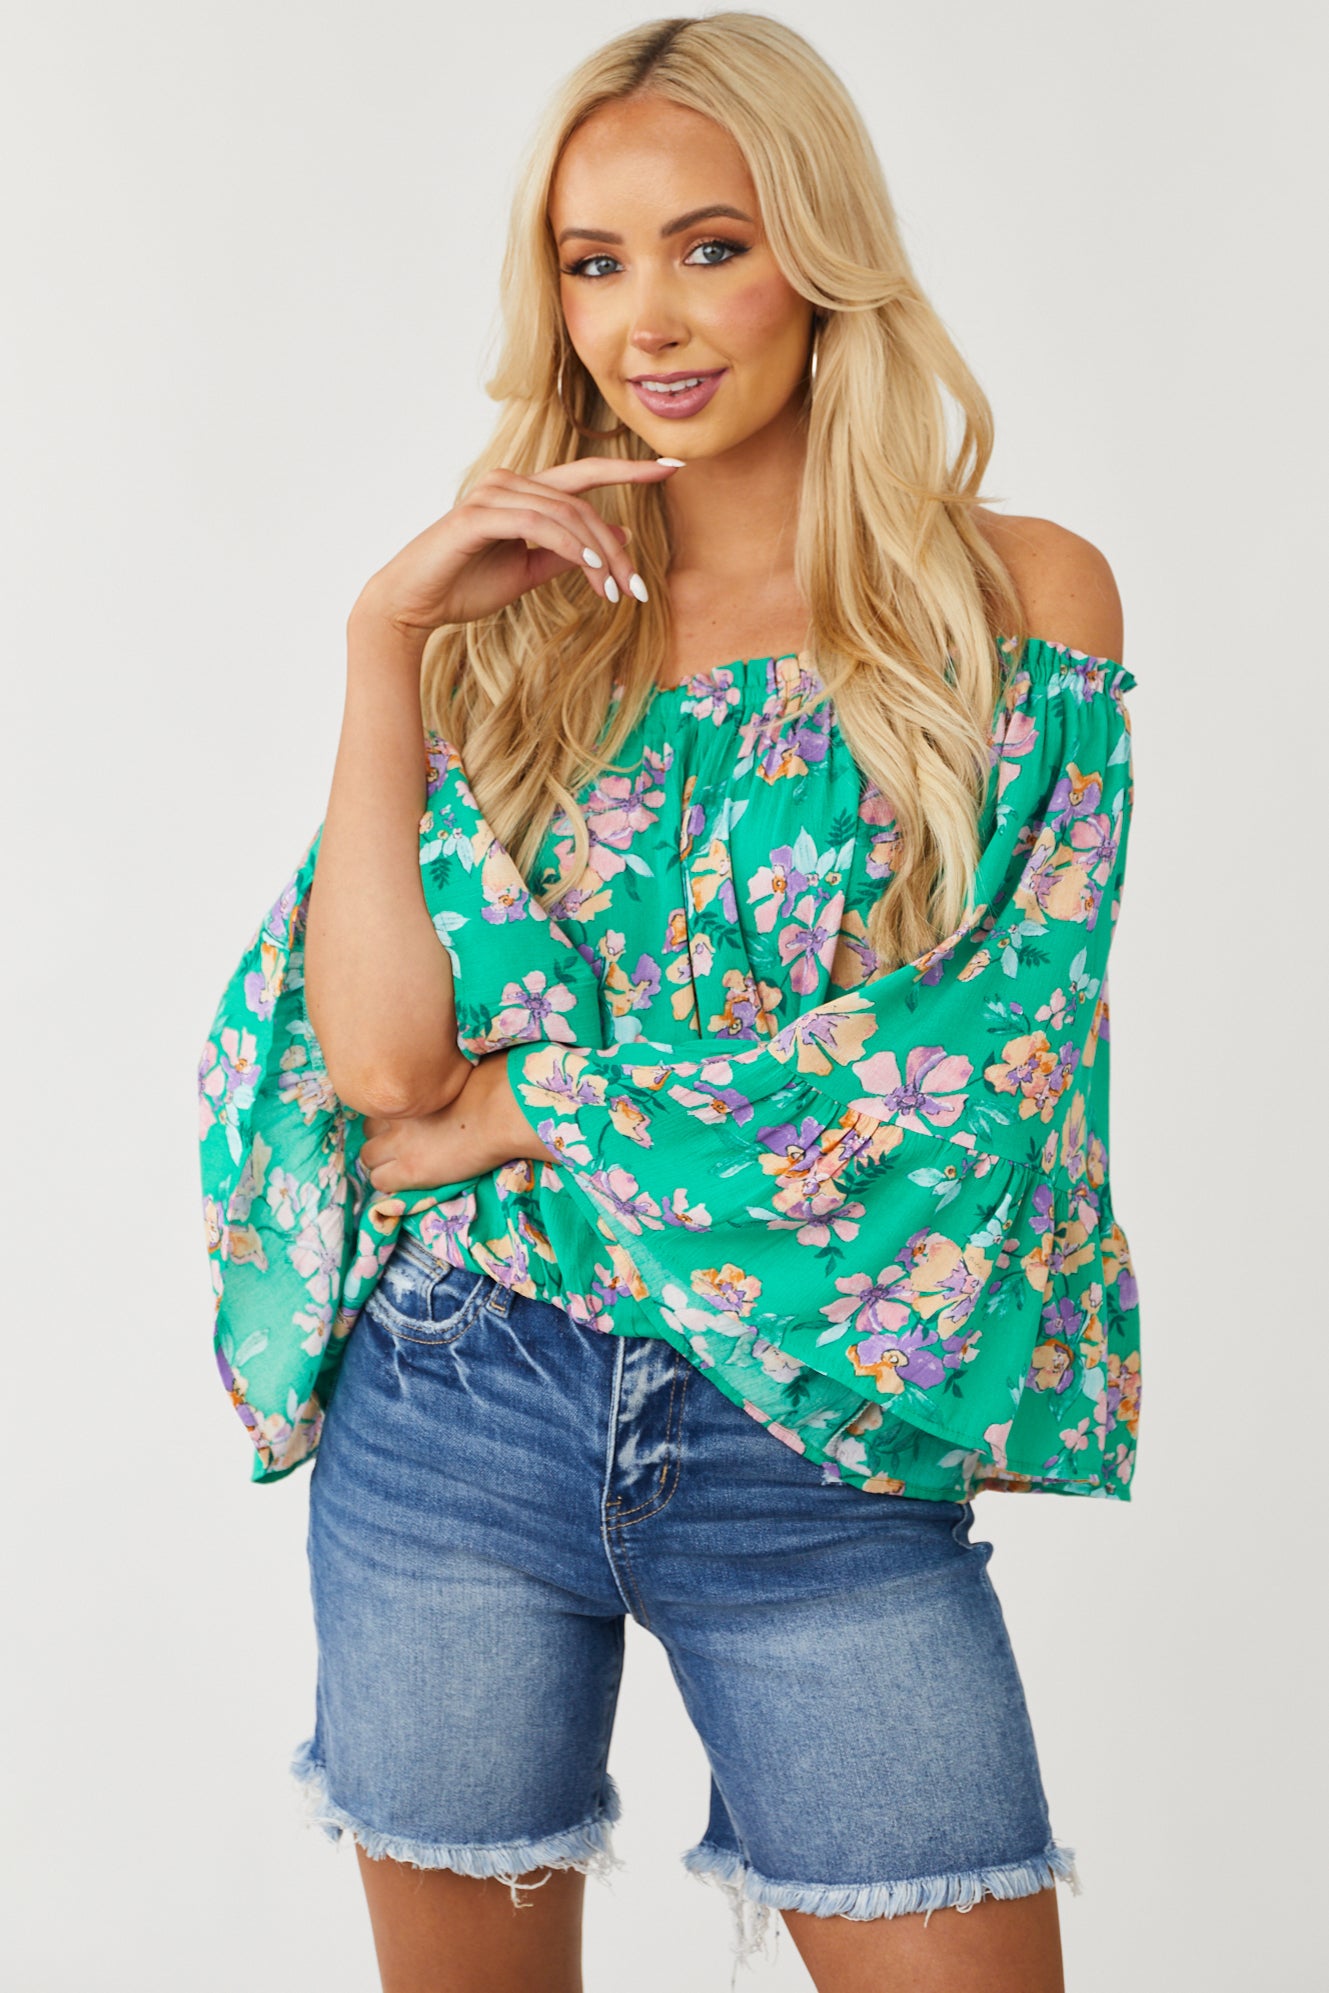 Kelly Green Floral Print Off the Shoulder Top